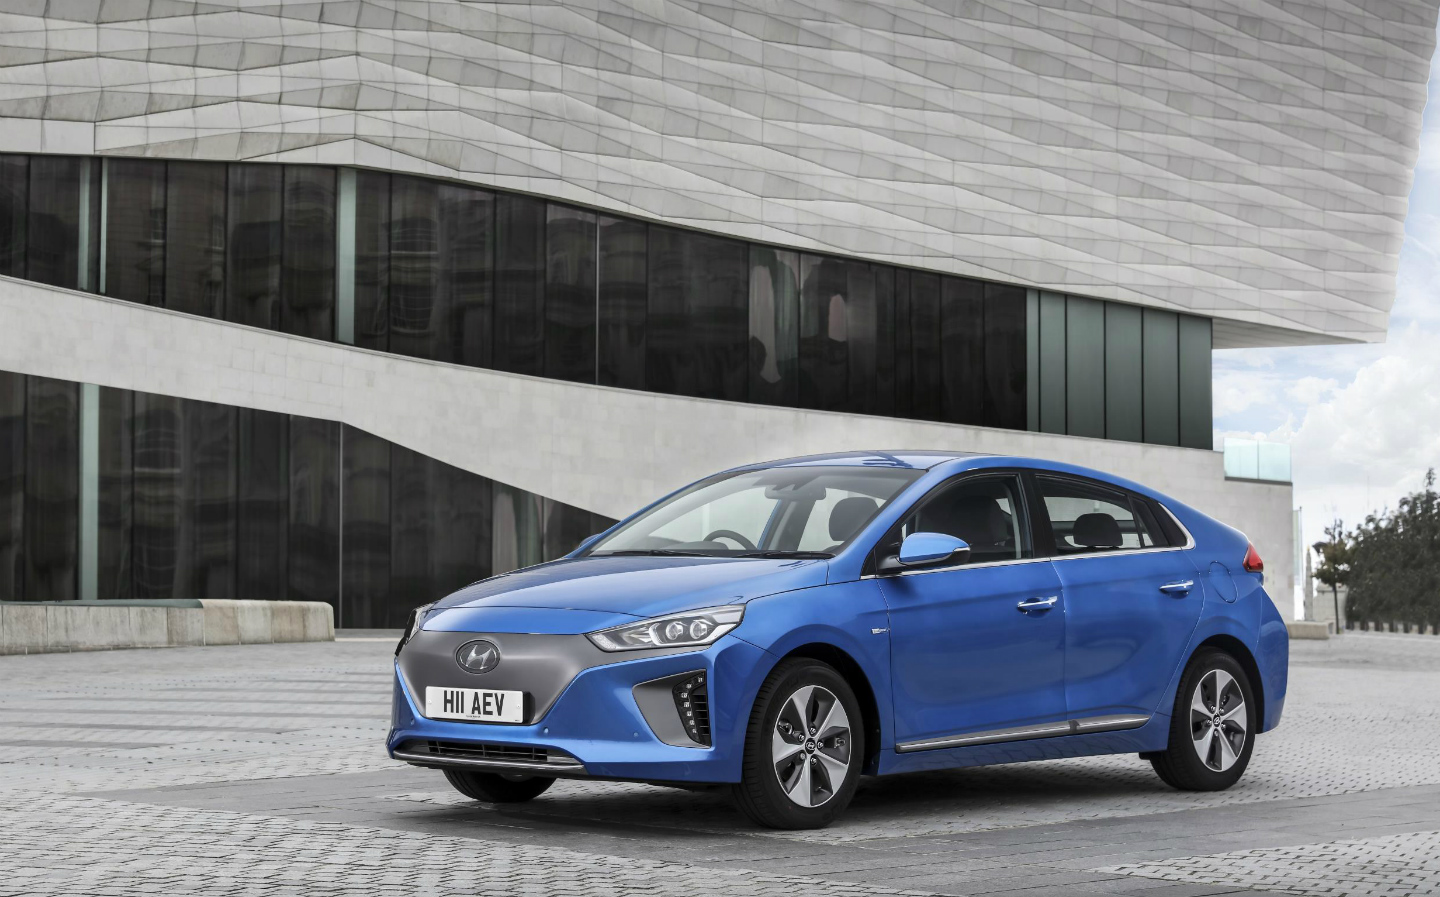 Hyundai Ioniq Electricis one of the the best cars to avoid paying road tax (VED)